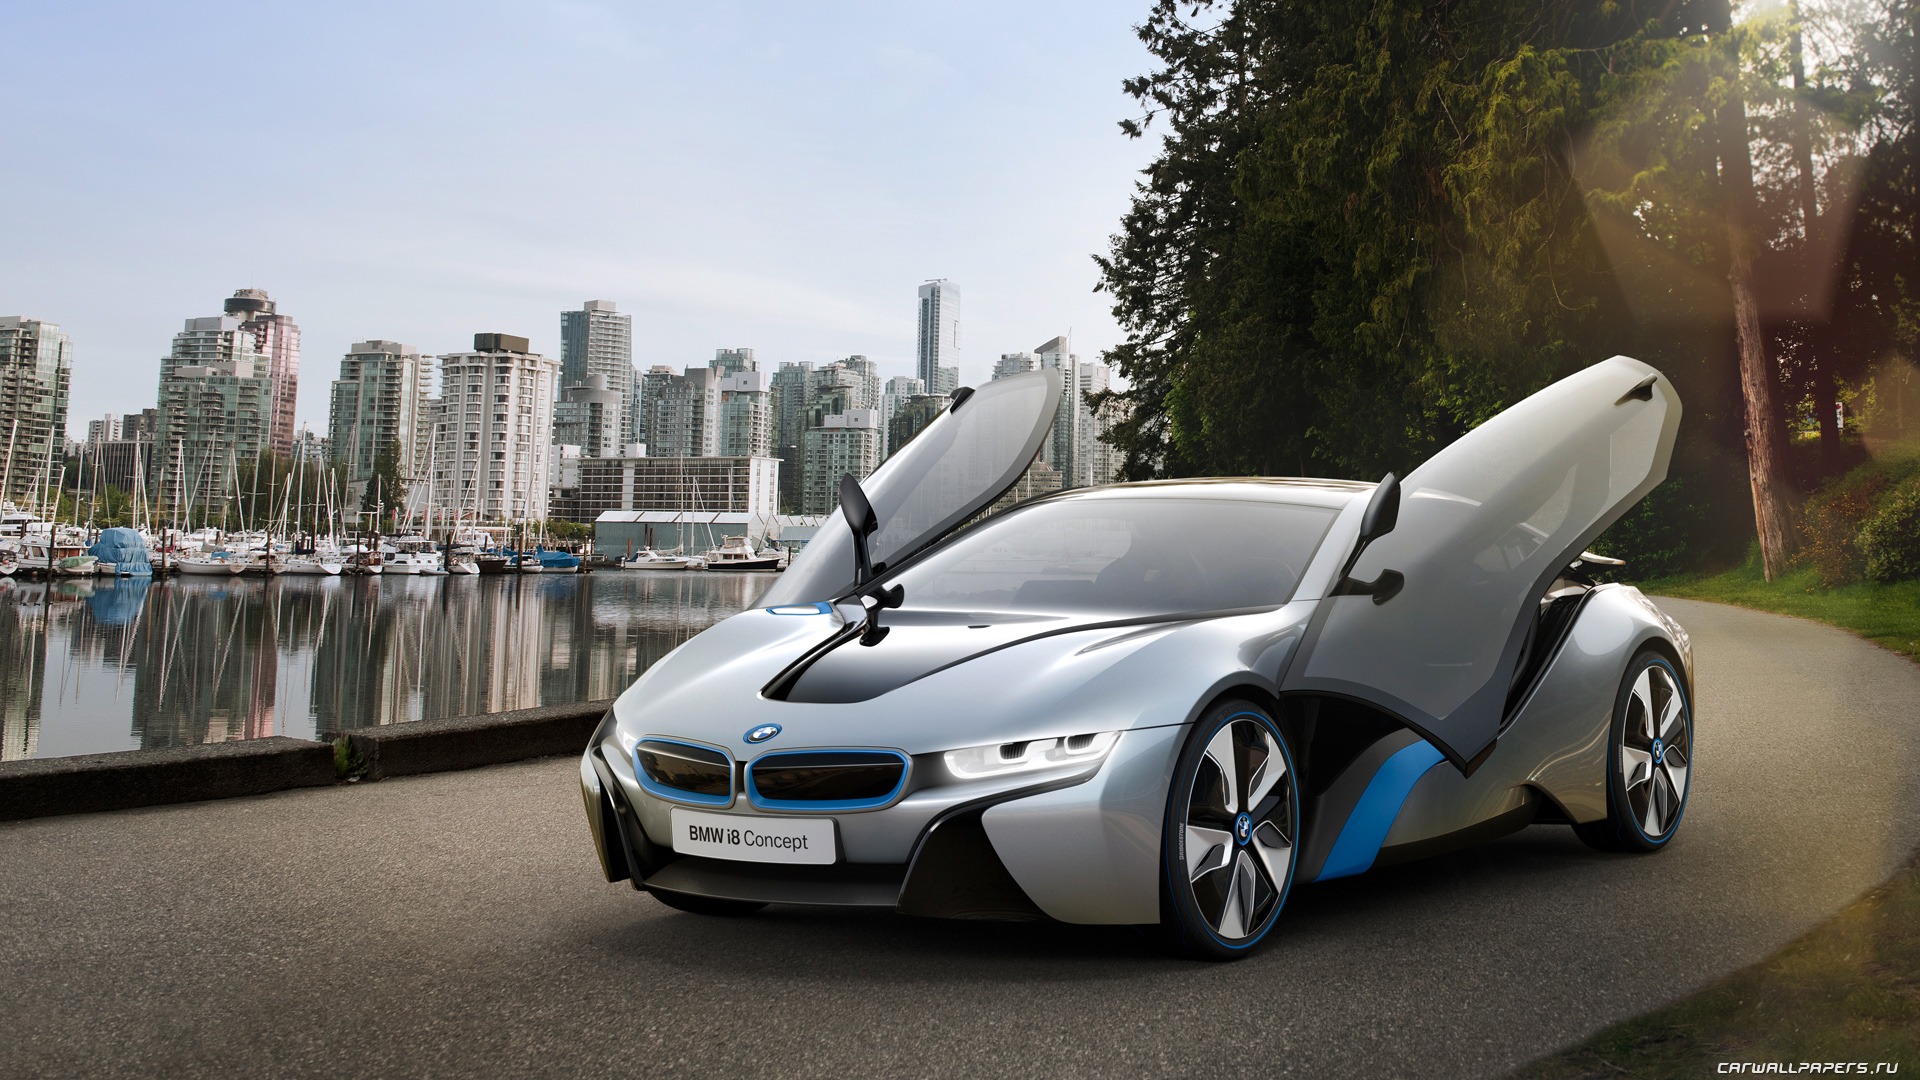 BMW i8 Concept - 2011 HD Wallpapers #2 - 1920x1080